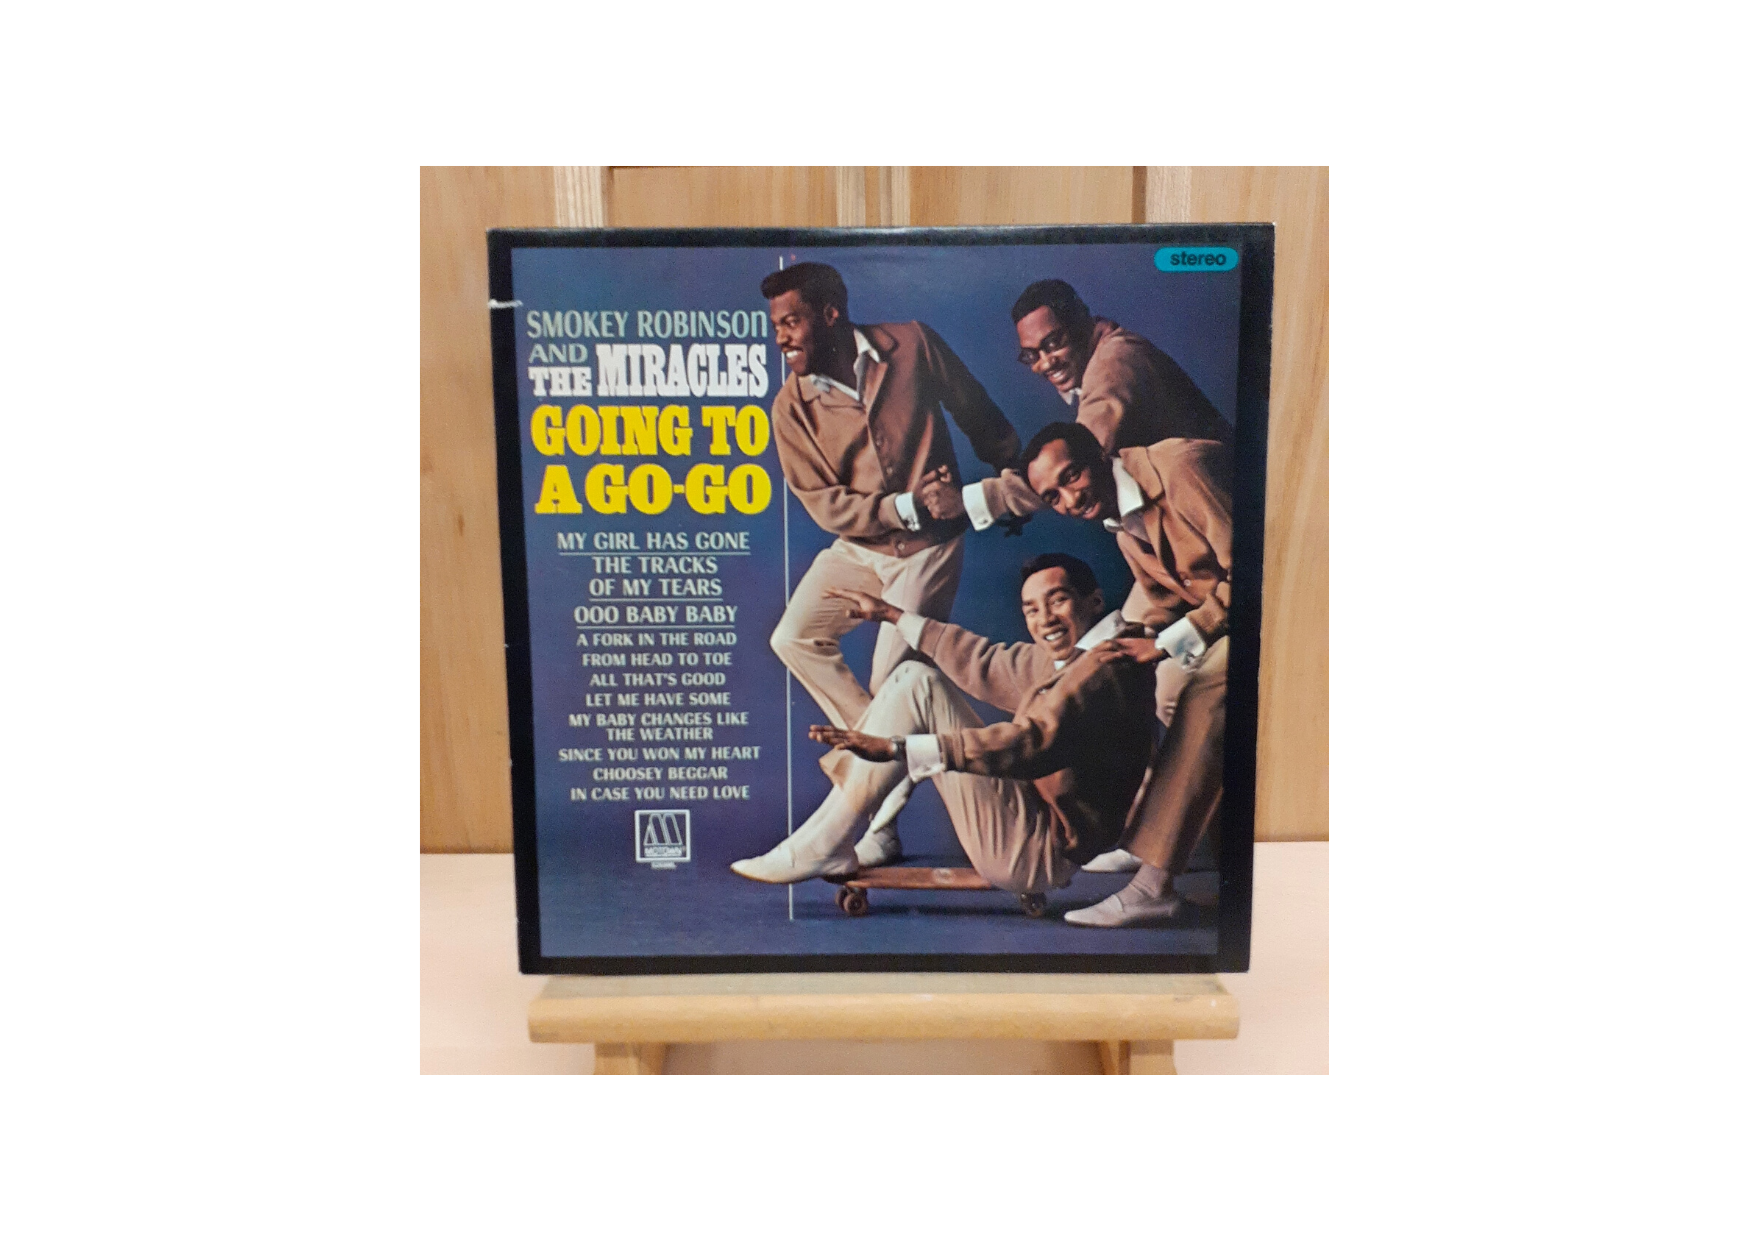 Smokey Robinson & The Miracles - Going To A Go-Go Vinyl Album Front View